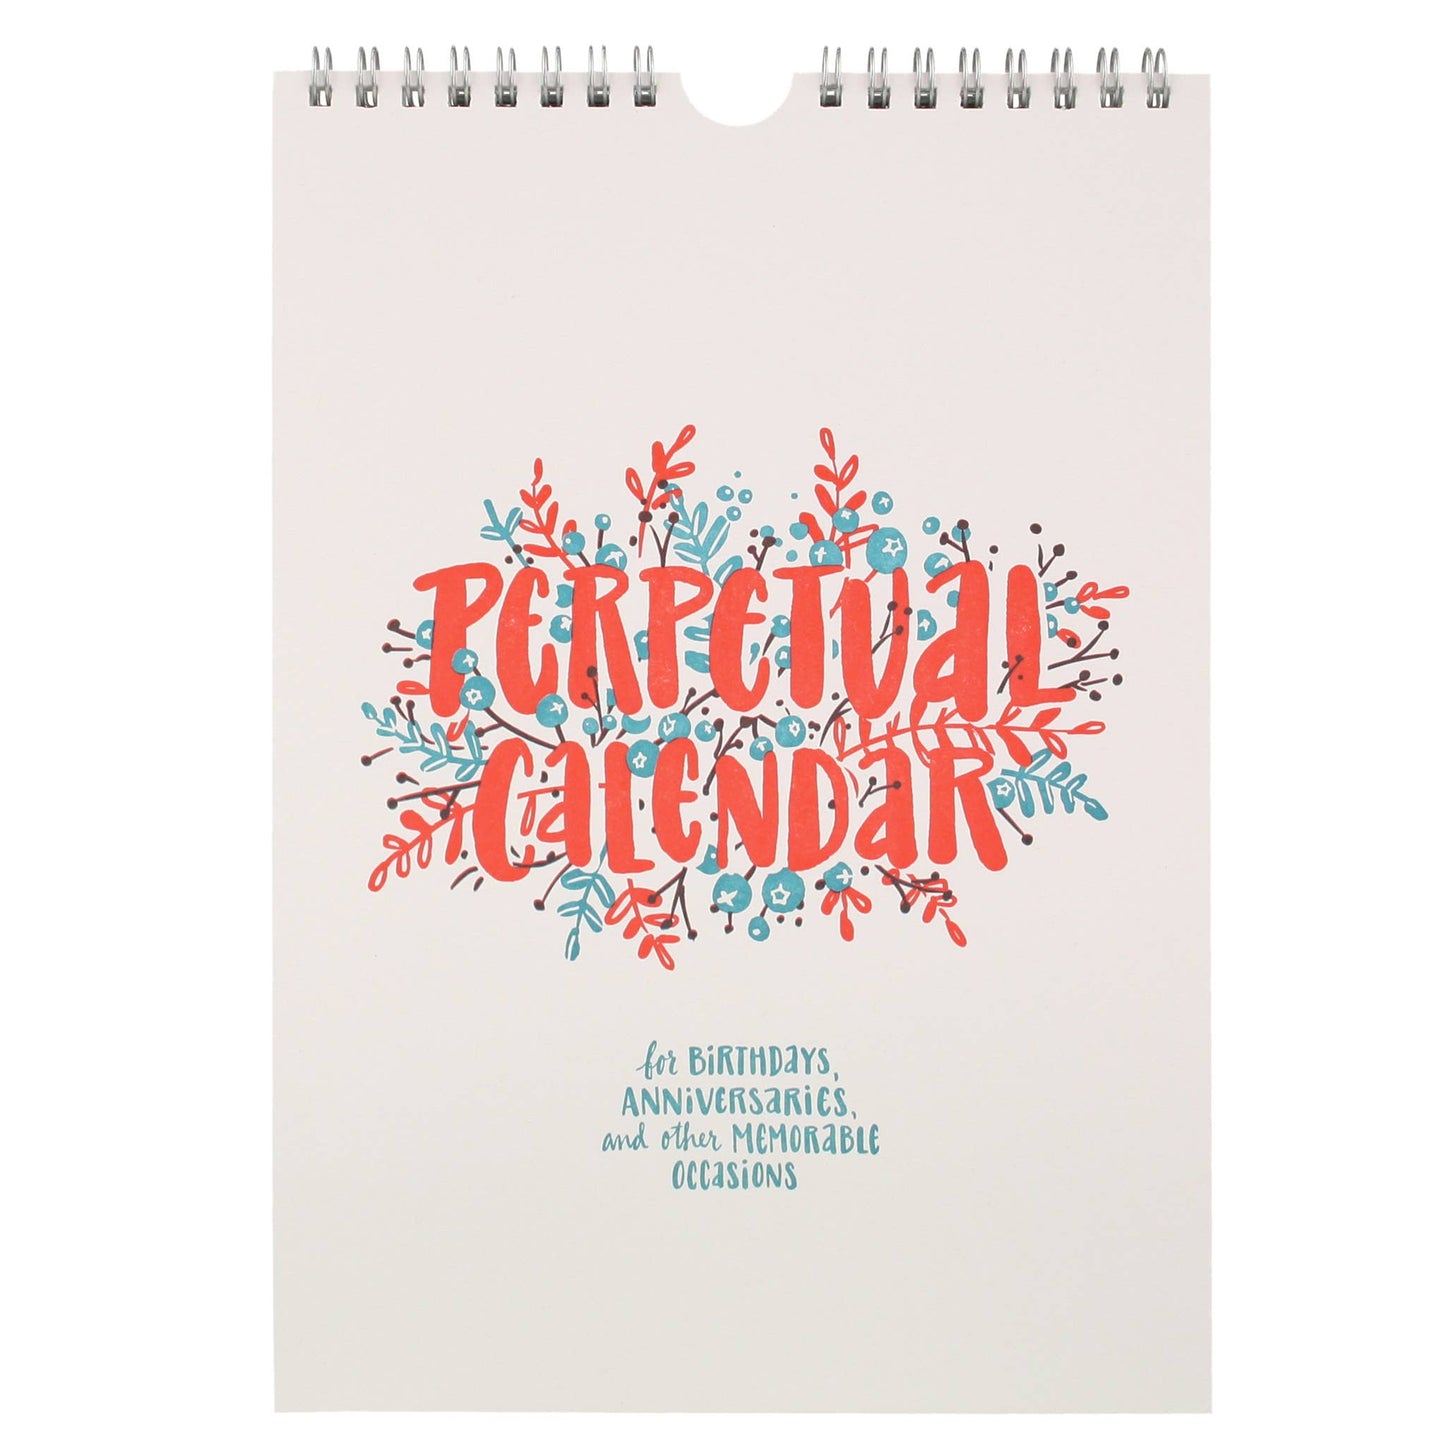 Perpetual Birthday Wall Calendar by Smudge Ink